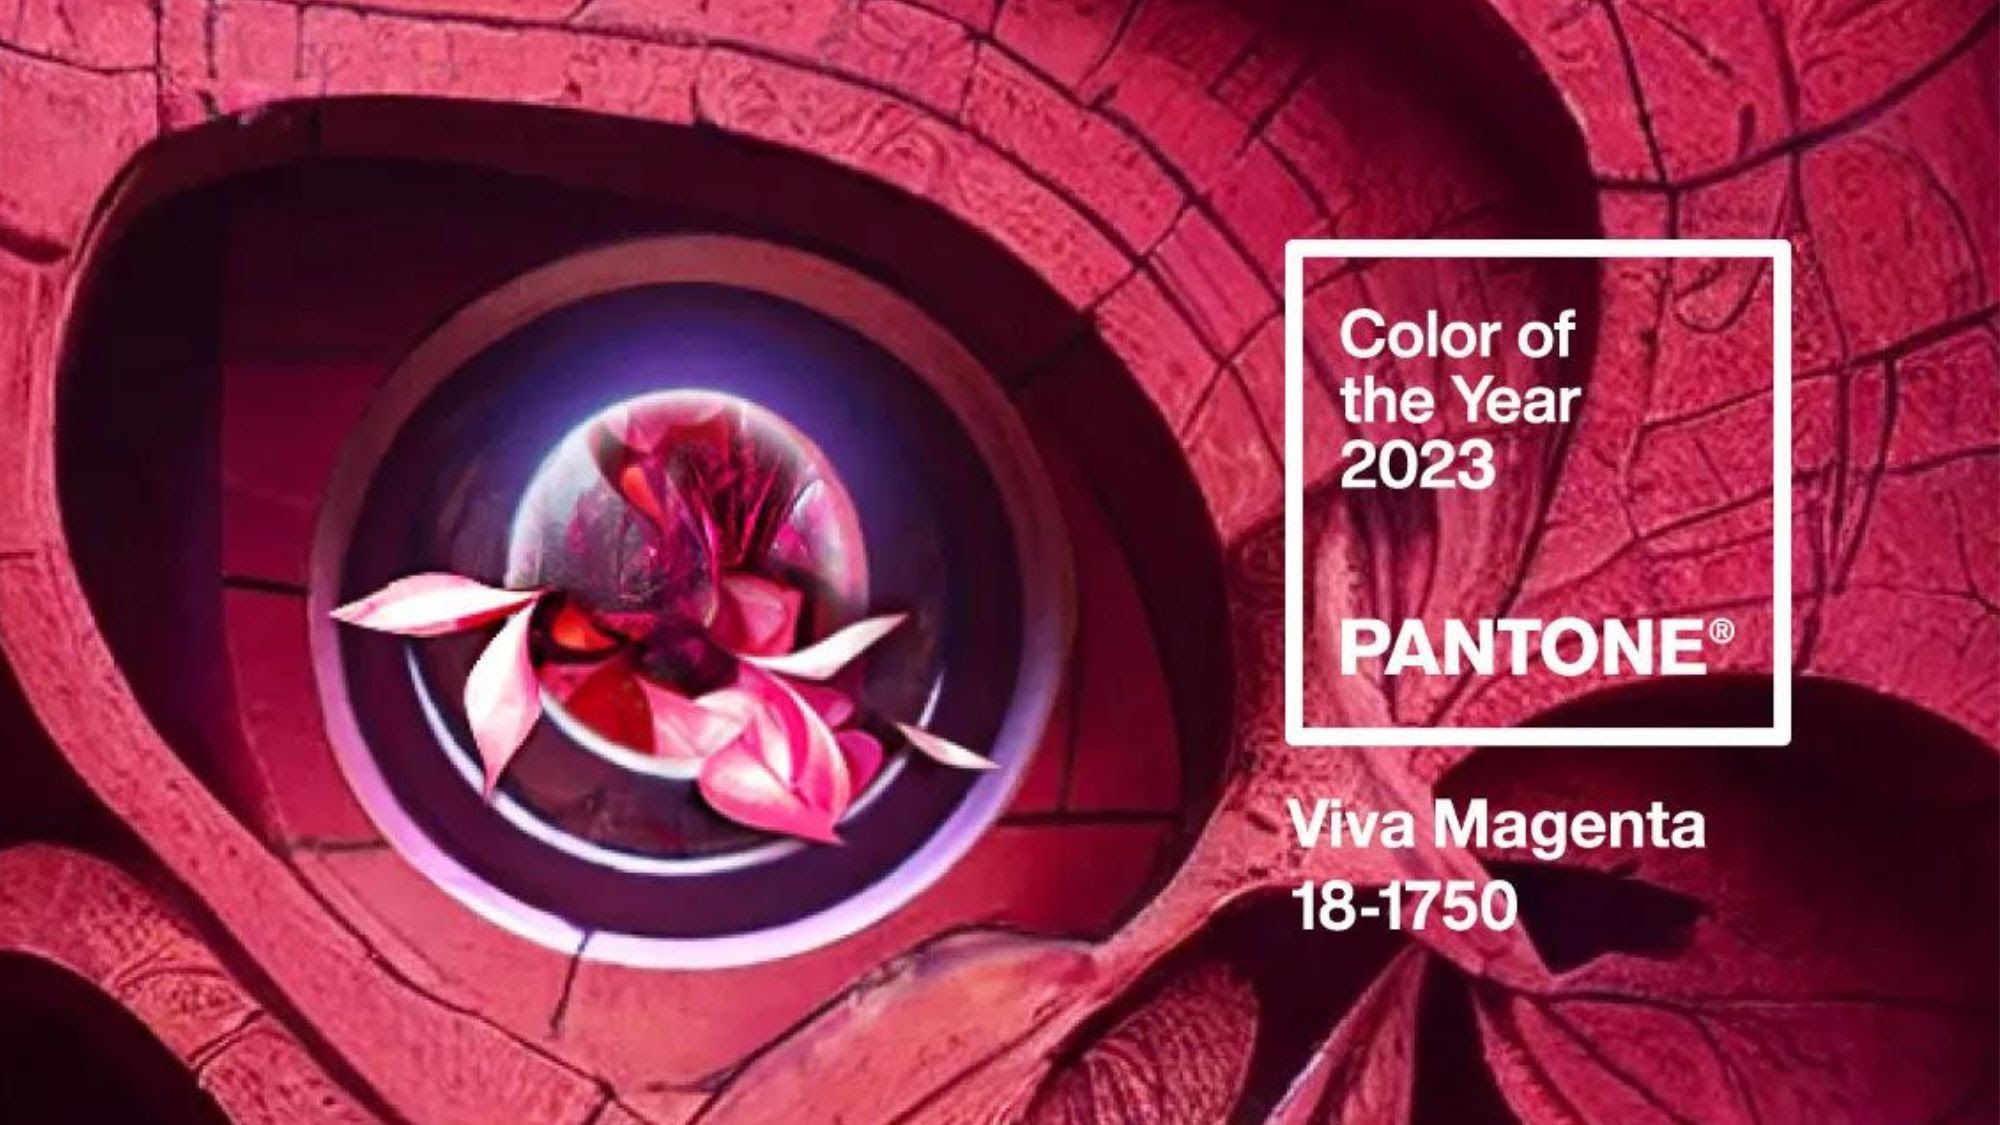 Viva Magenta! What Pantone's colour of the year tells us about 2023, Fashion